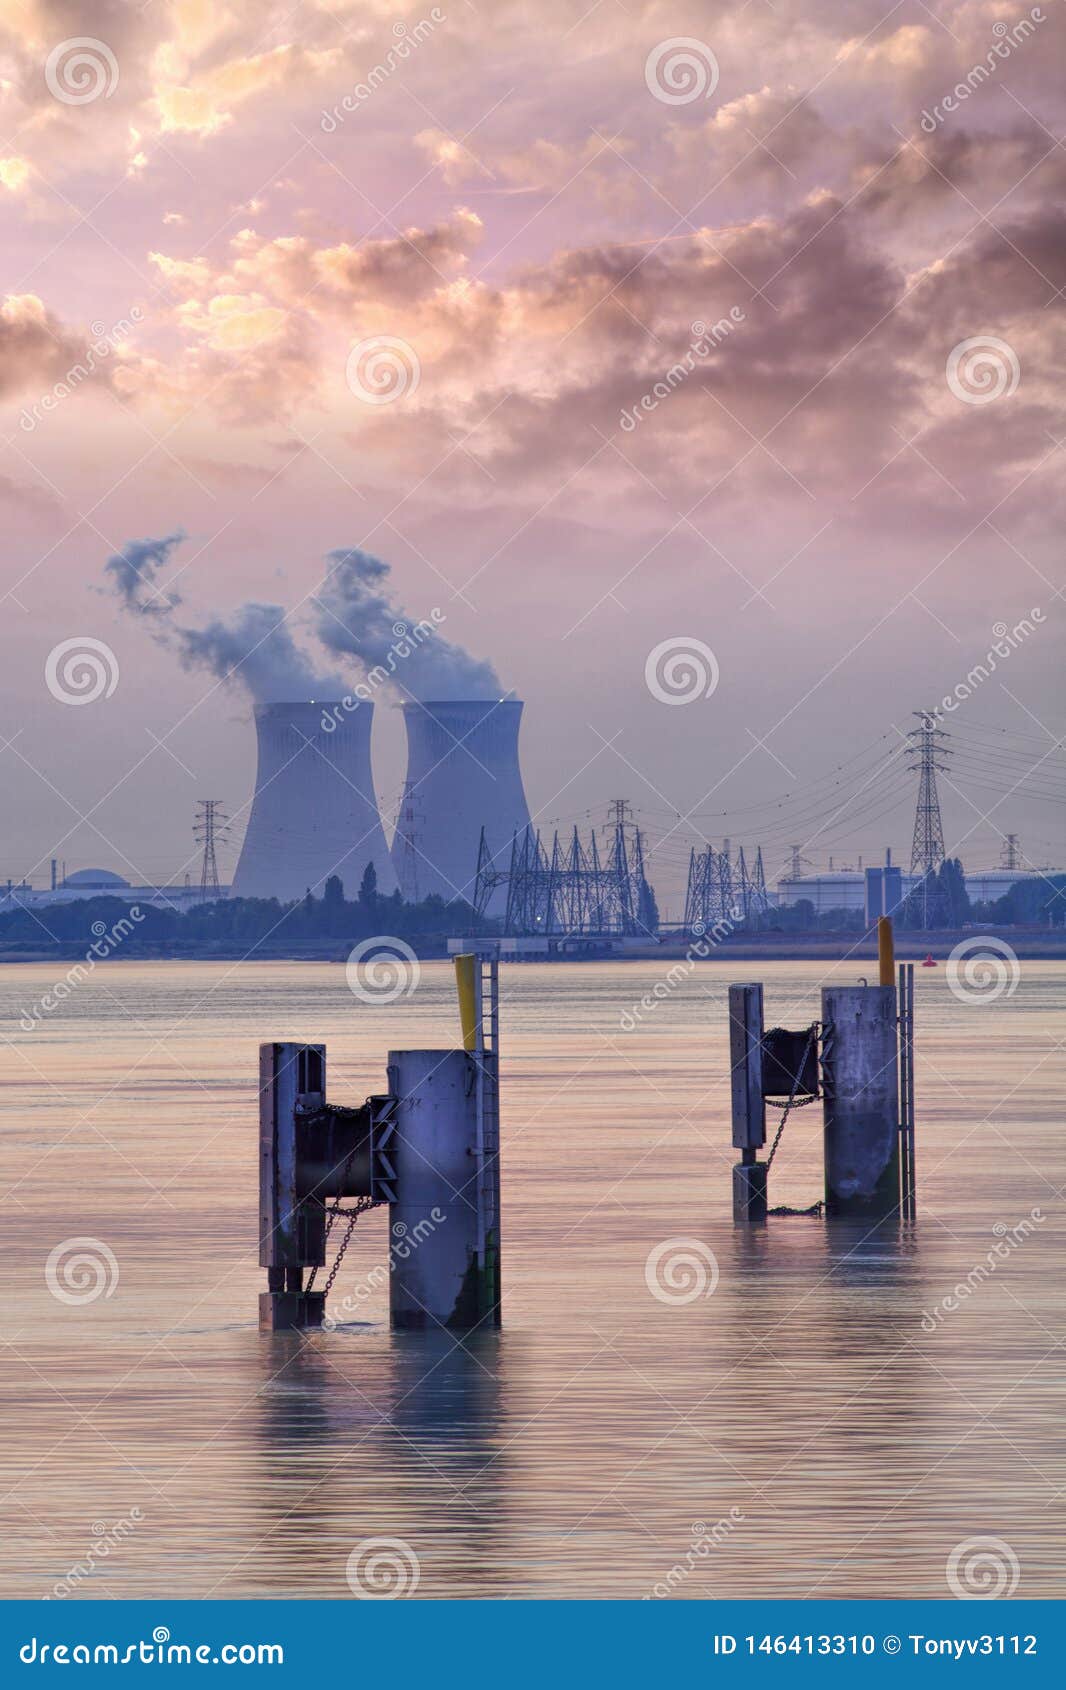 riverbank with nuclear power plant doel during a sunset with dramatic cluds, port of antwerp